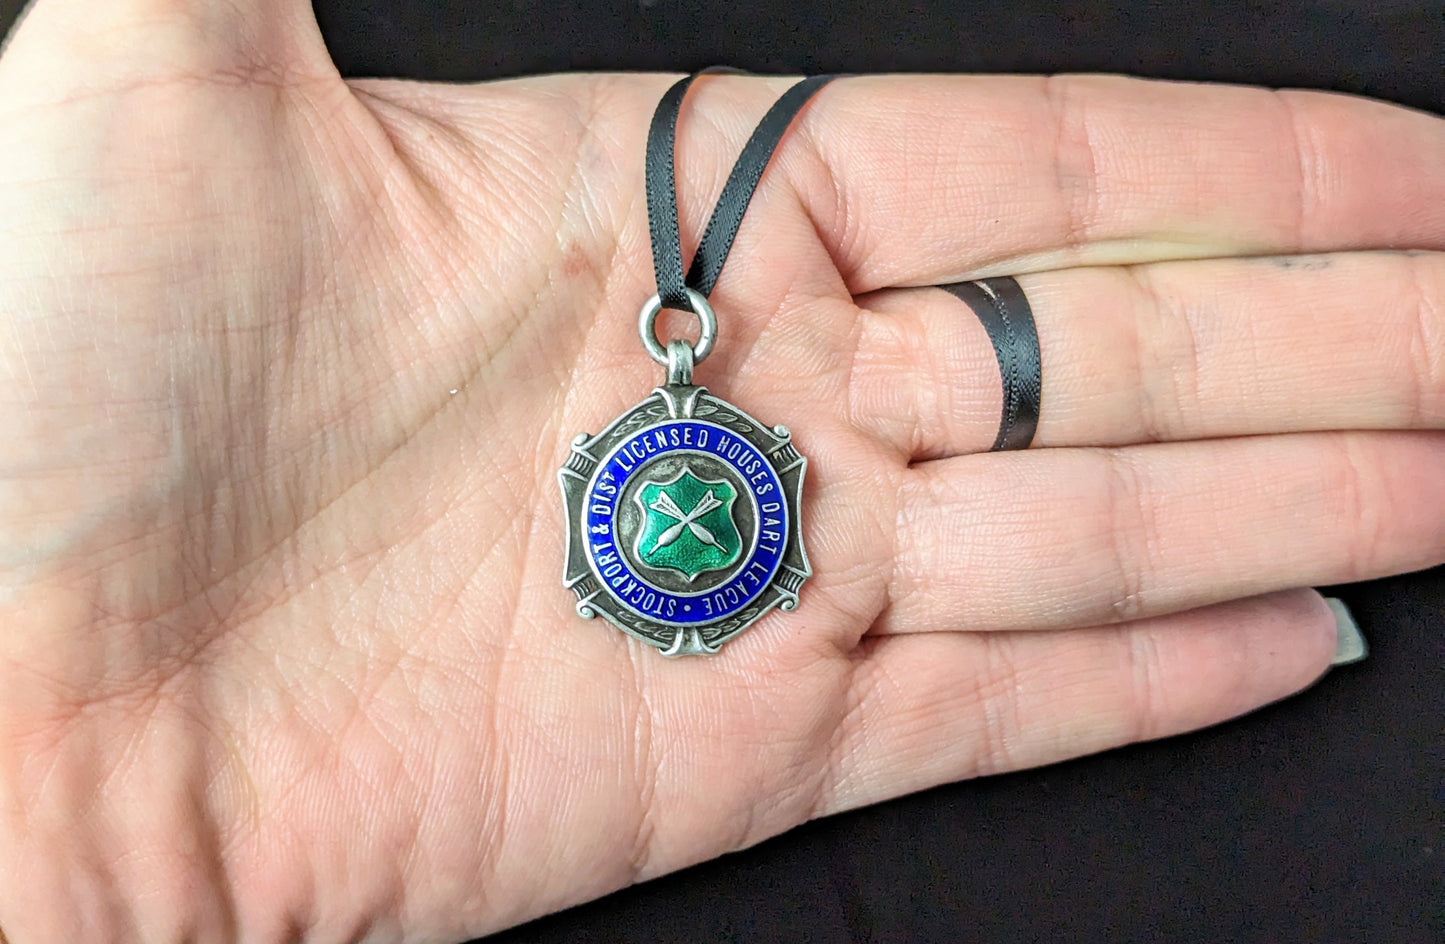 Vintage sterling silver and enamel fob pendant, Darts league